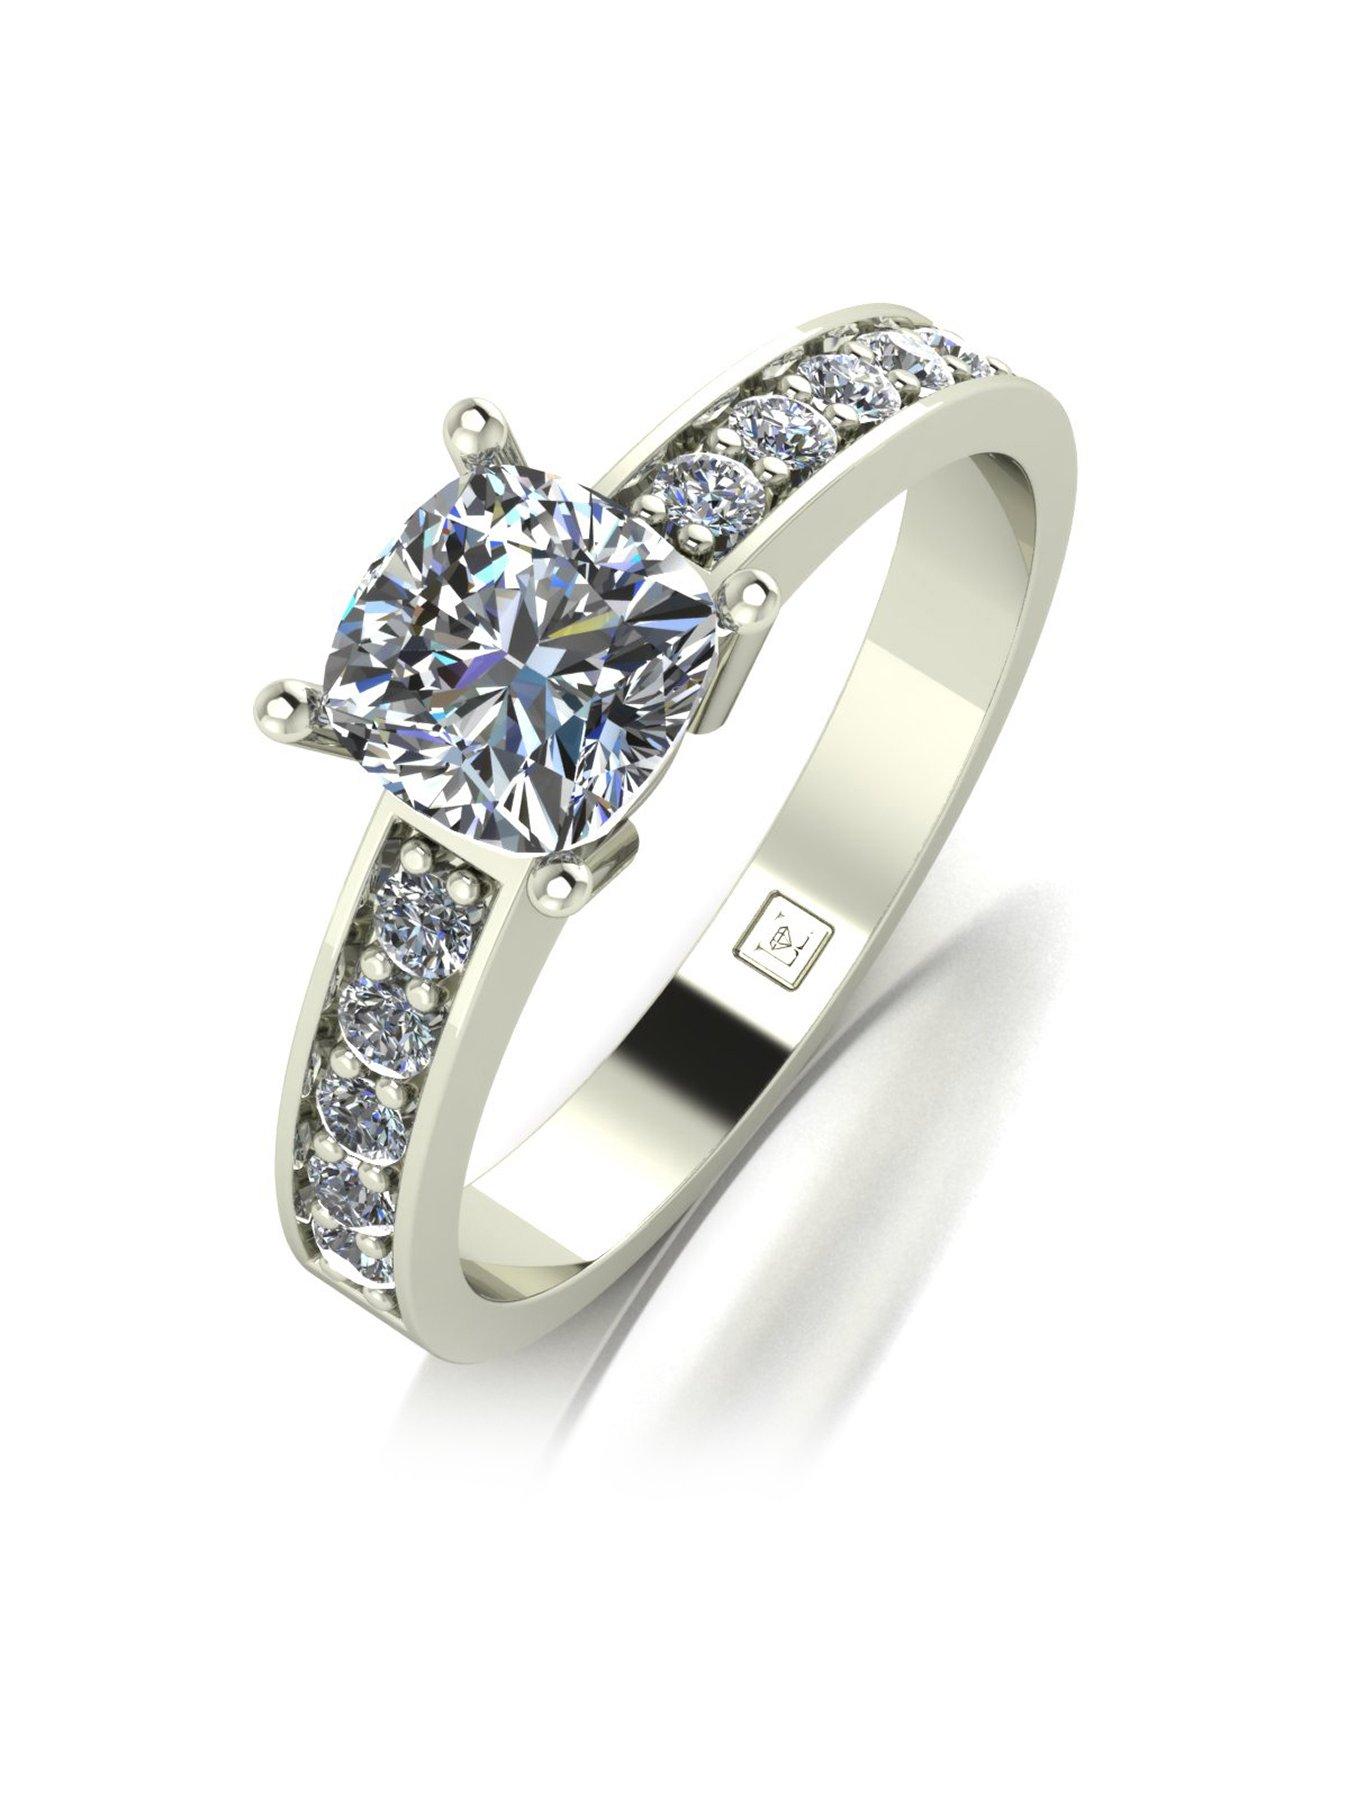 Details about   14k White Gold Finish 1.35ct Black & White Sim Dia Engagement Ring 925 Silver 